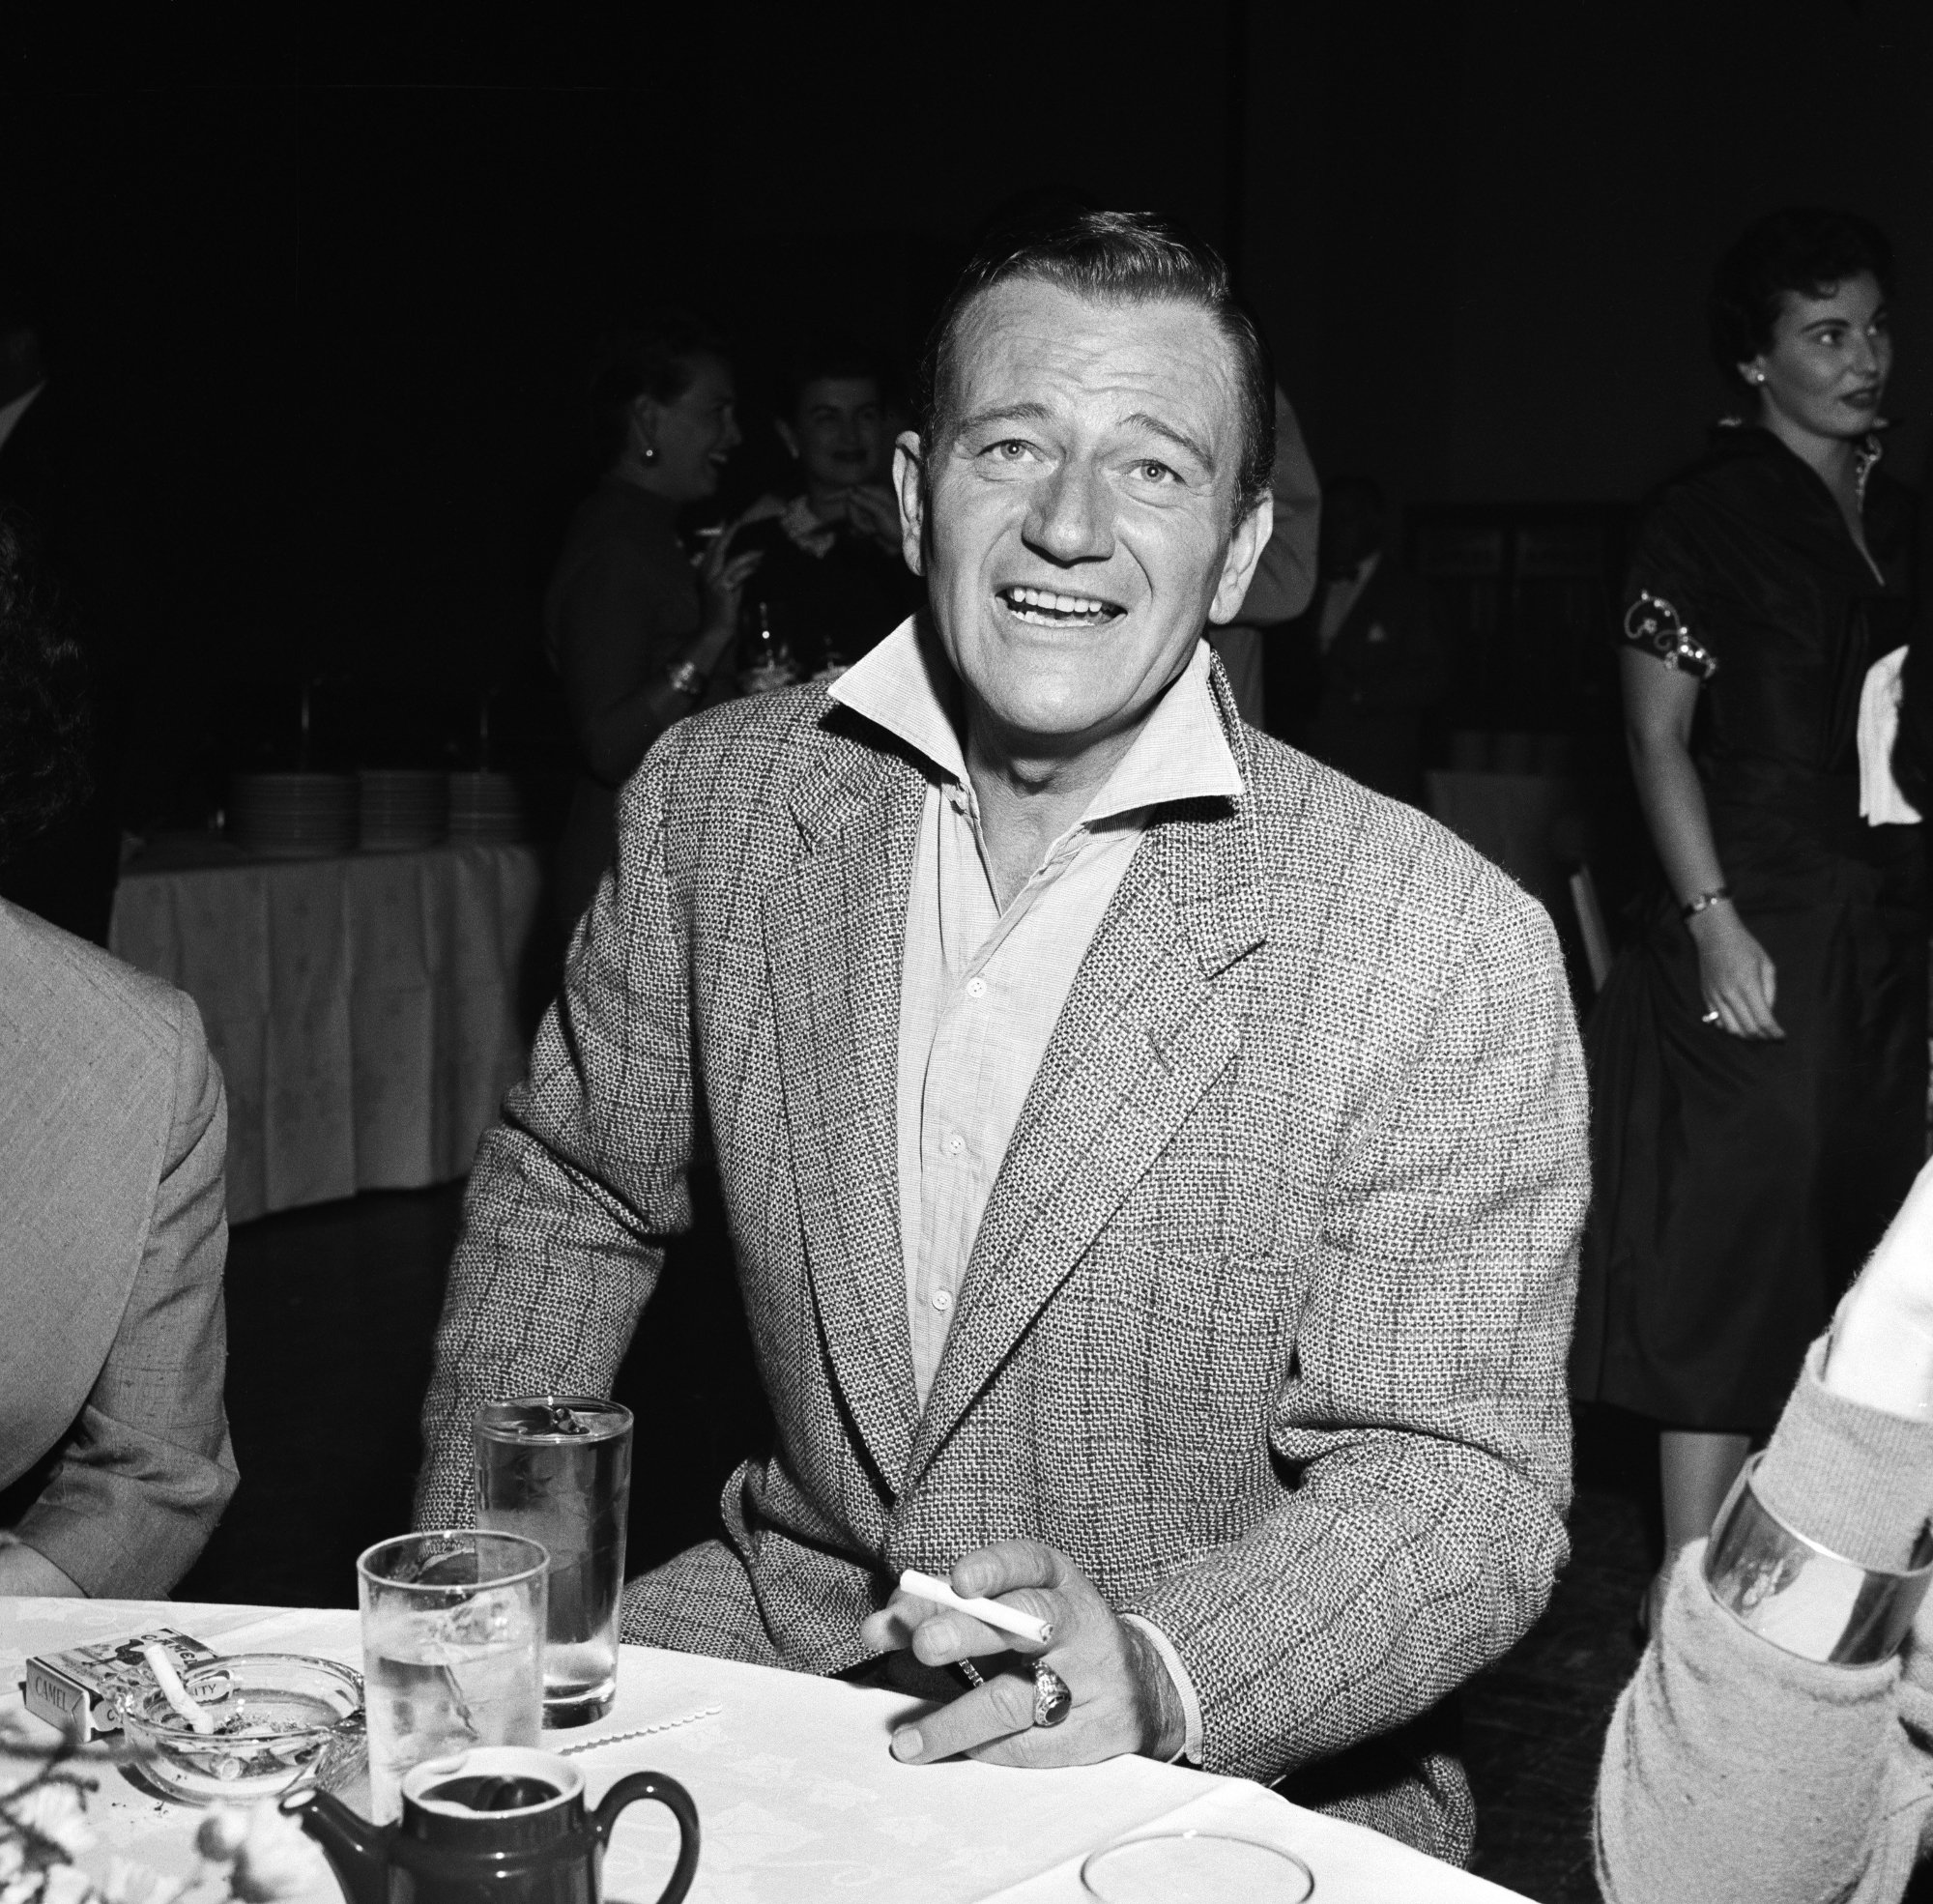 John Wayne, the actor who gave advice to Michael Caine, wearing a suit with a cigarette in his hand, sitting at a table